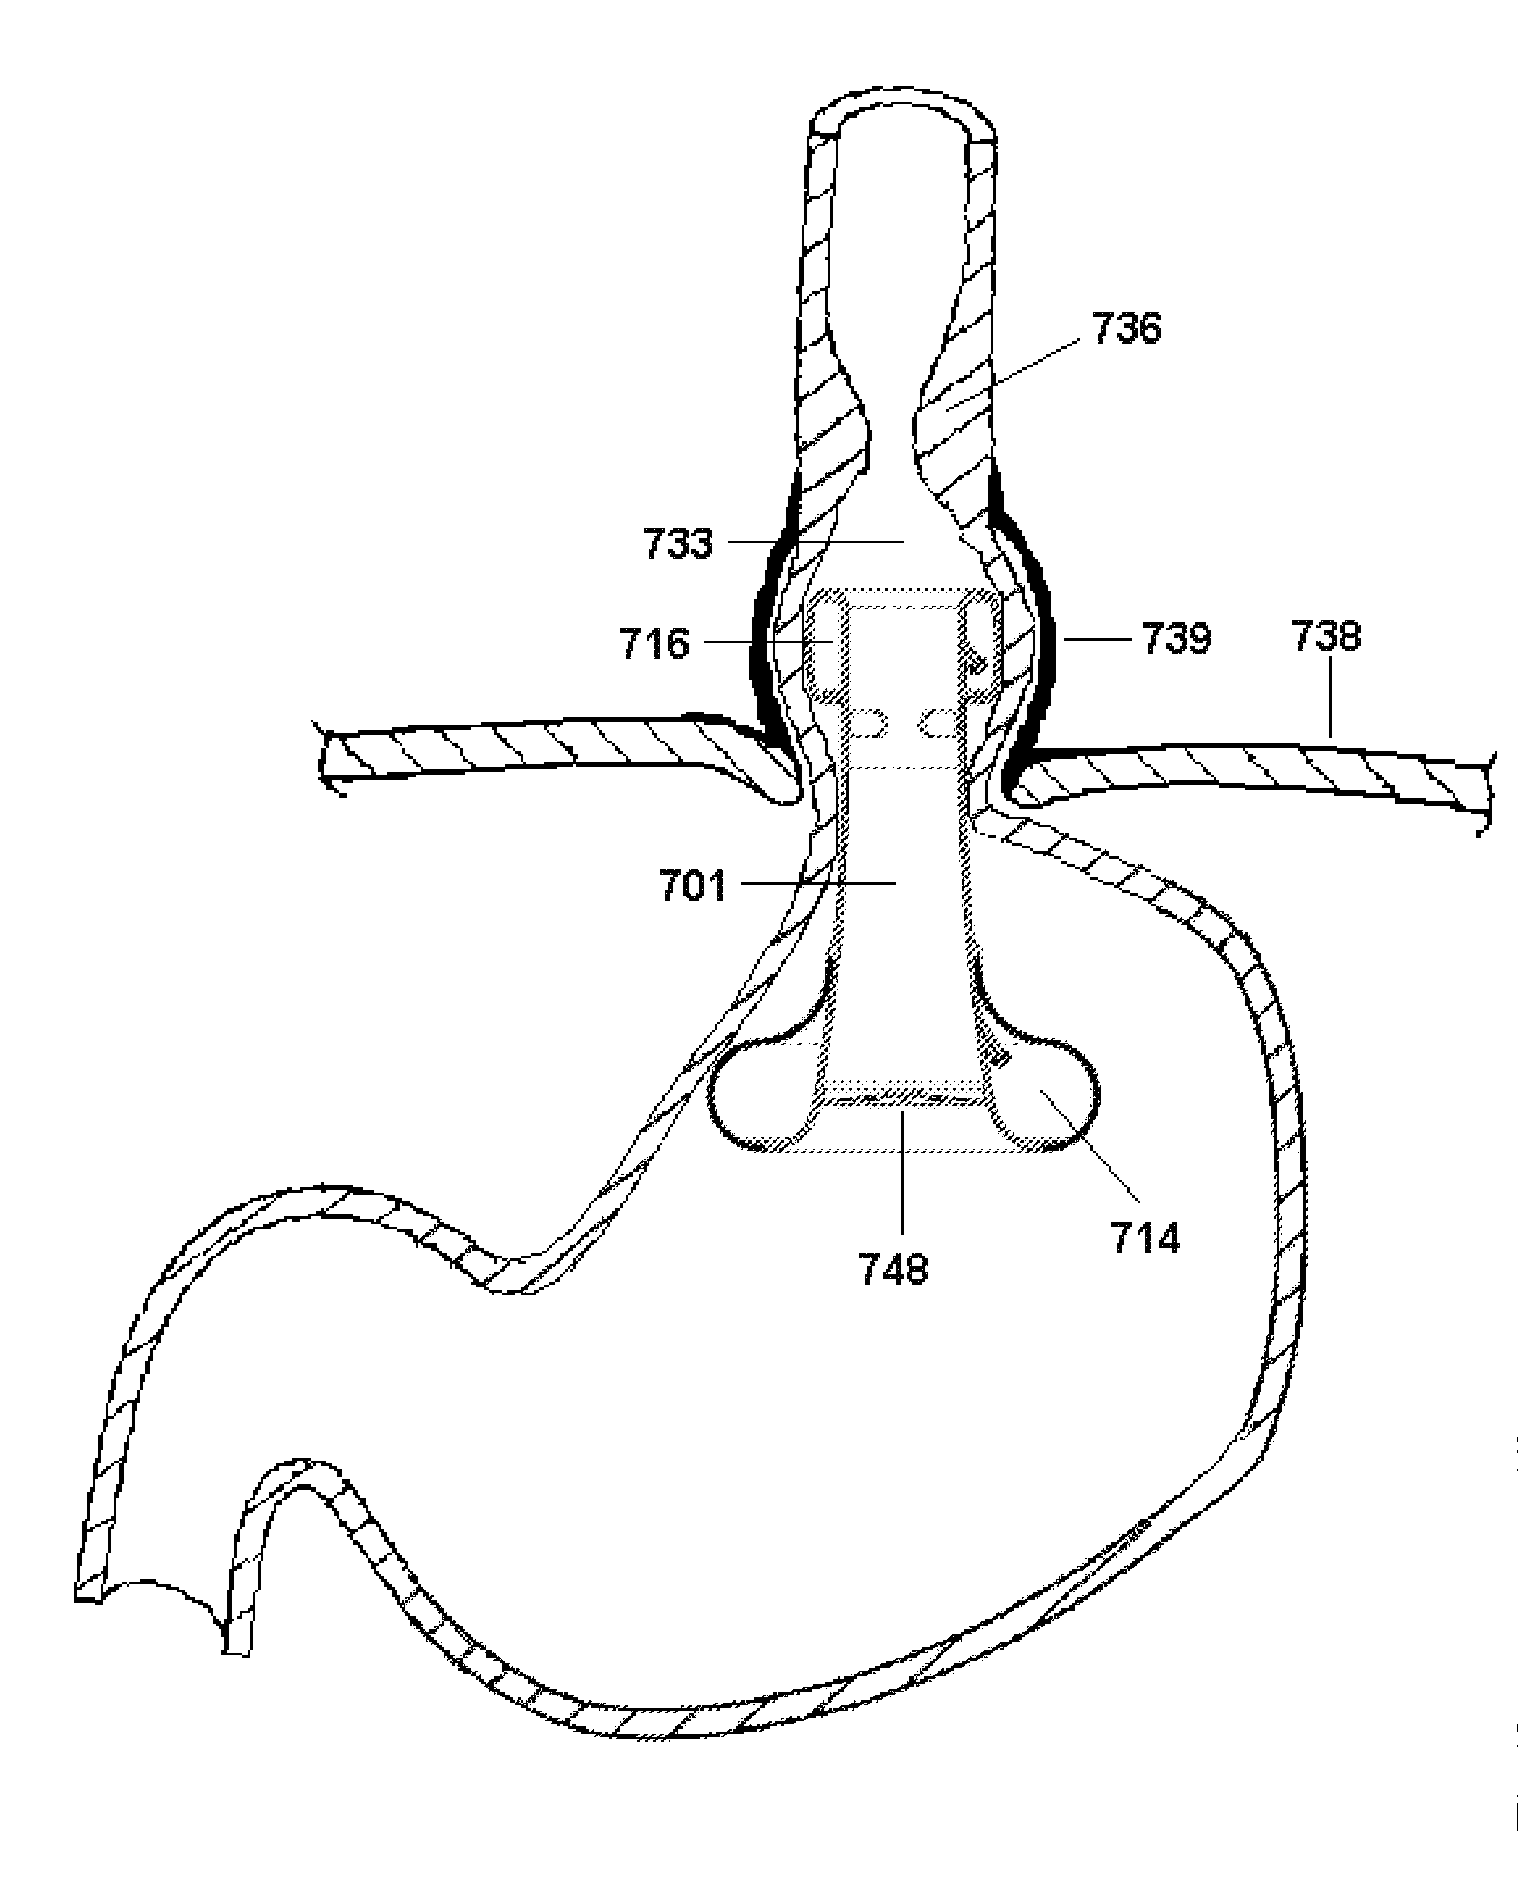 Anti-reflux devices and methods for treating gastro-esophageal reflux disease (GERD)